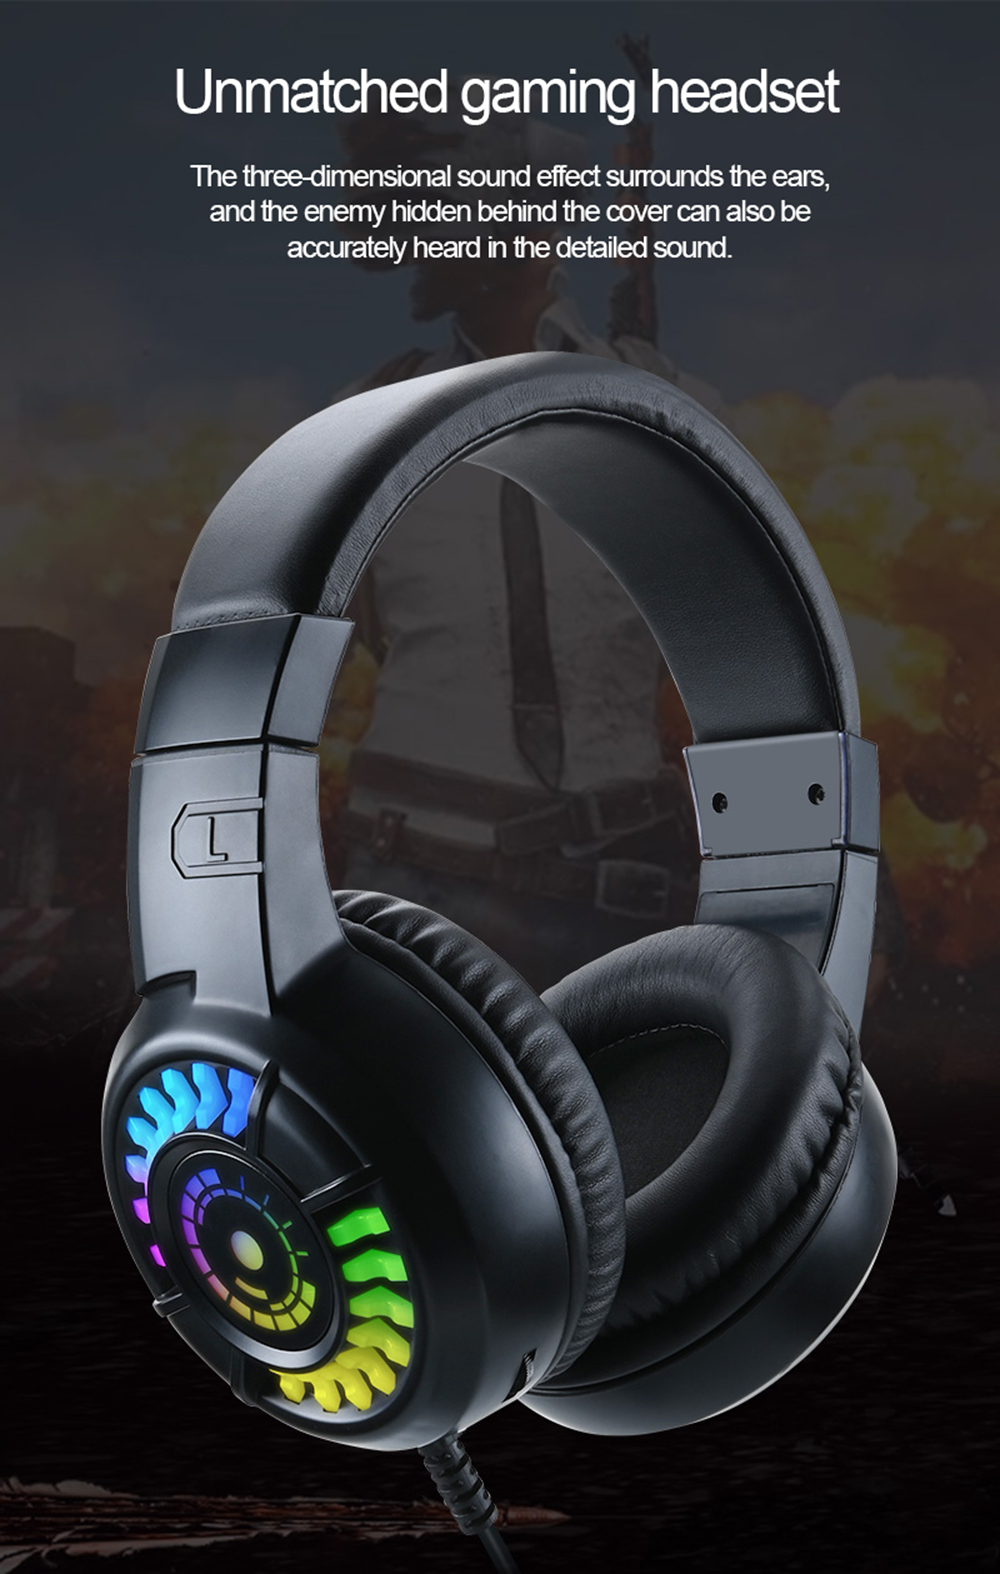 198I-A7-E-sport-Gaming-Headset-50mm-Unit-55mm-Speaker-Size-Cool-Lighting-Built-in-Microphone-35mmUSB-1802467-1